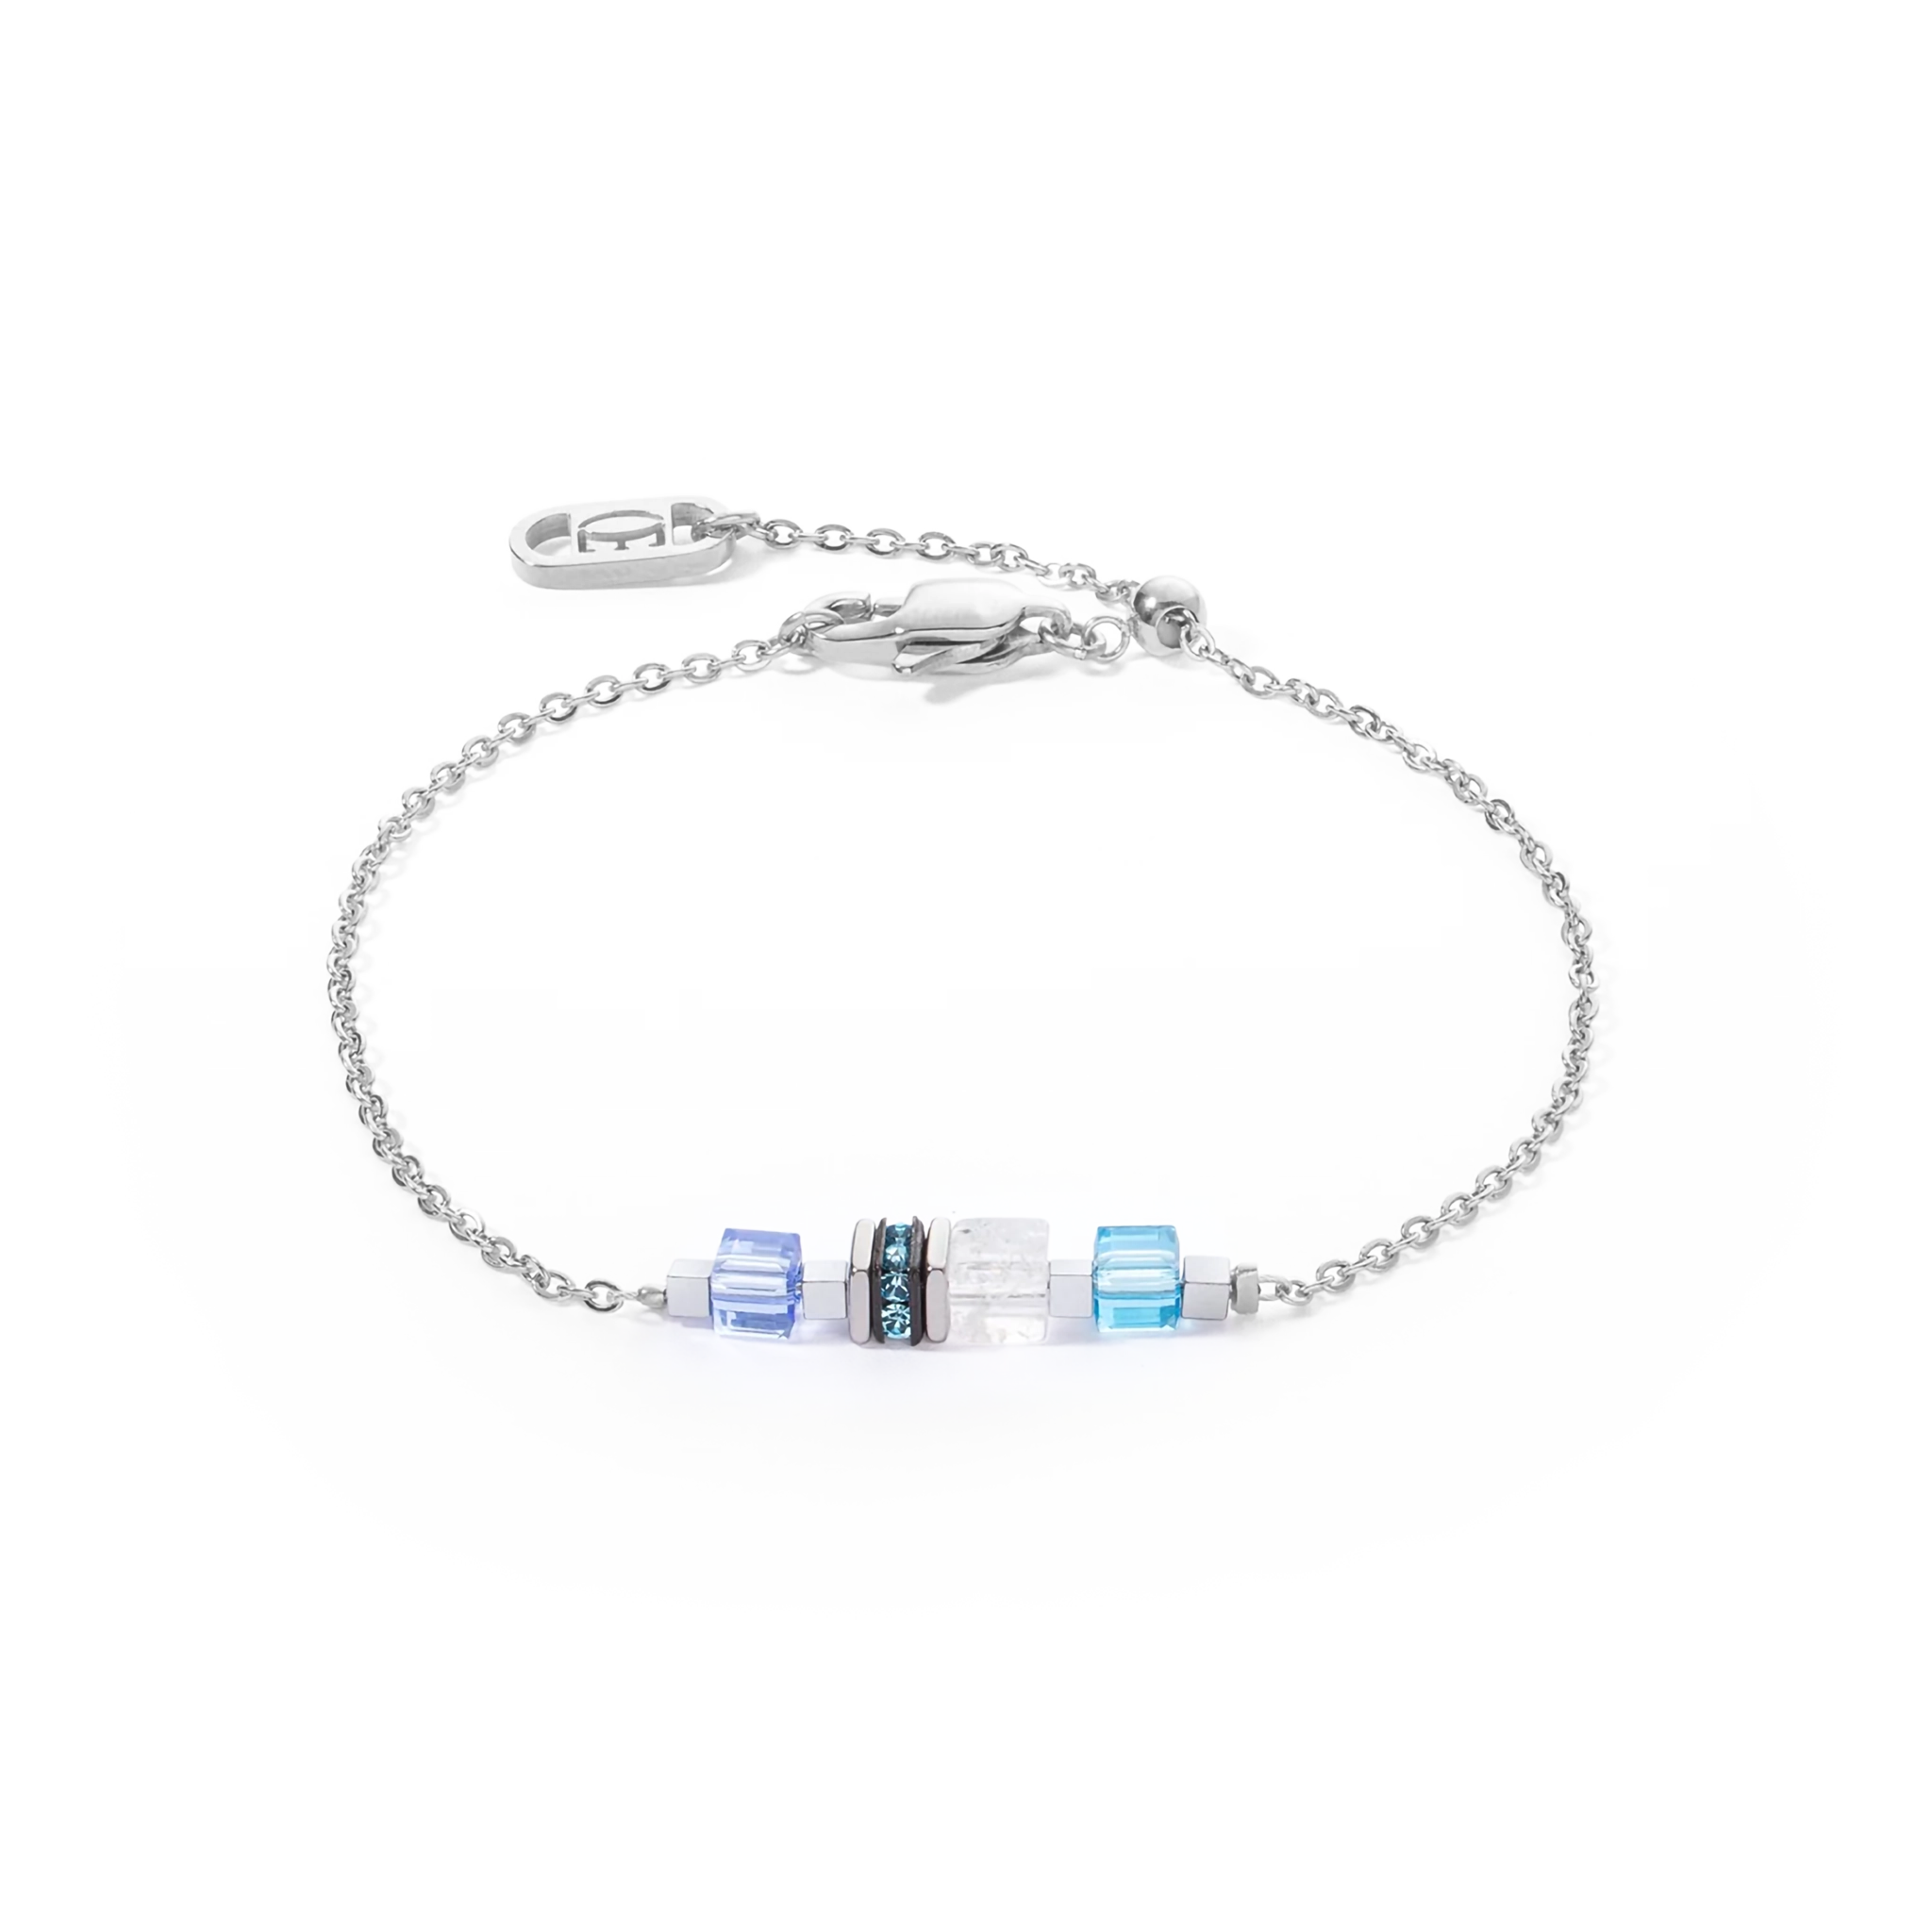 A silver chain bracelet with blue cube shaped stones